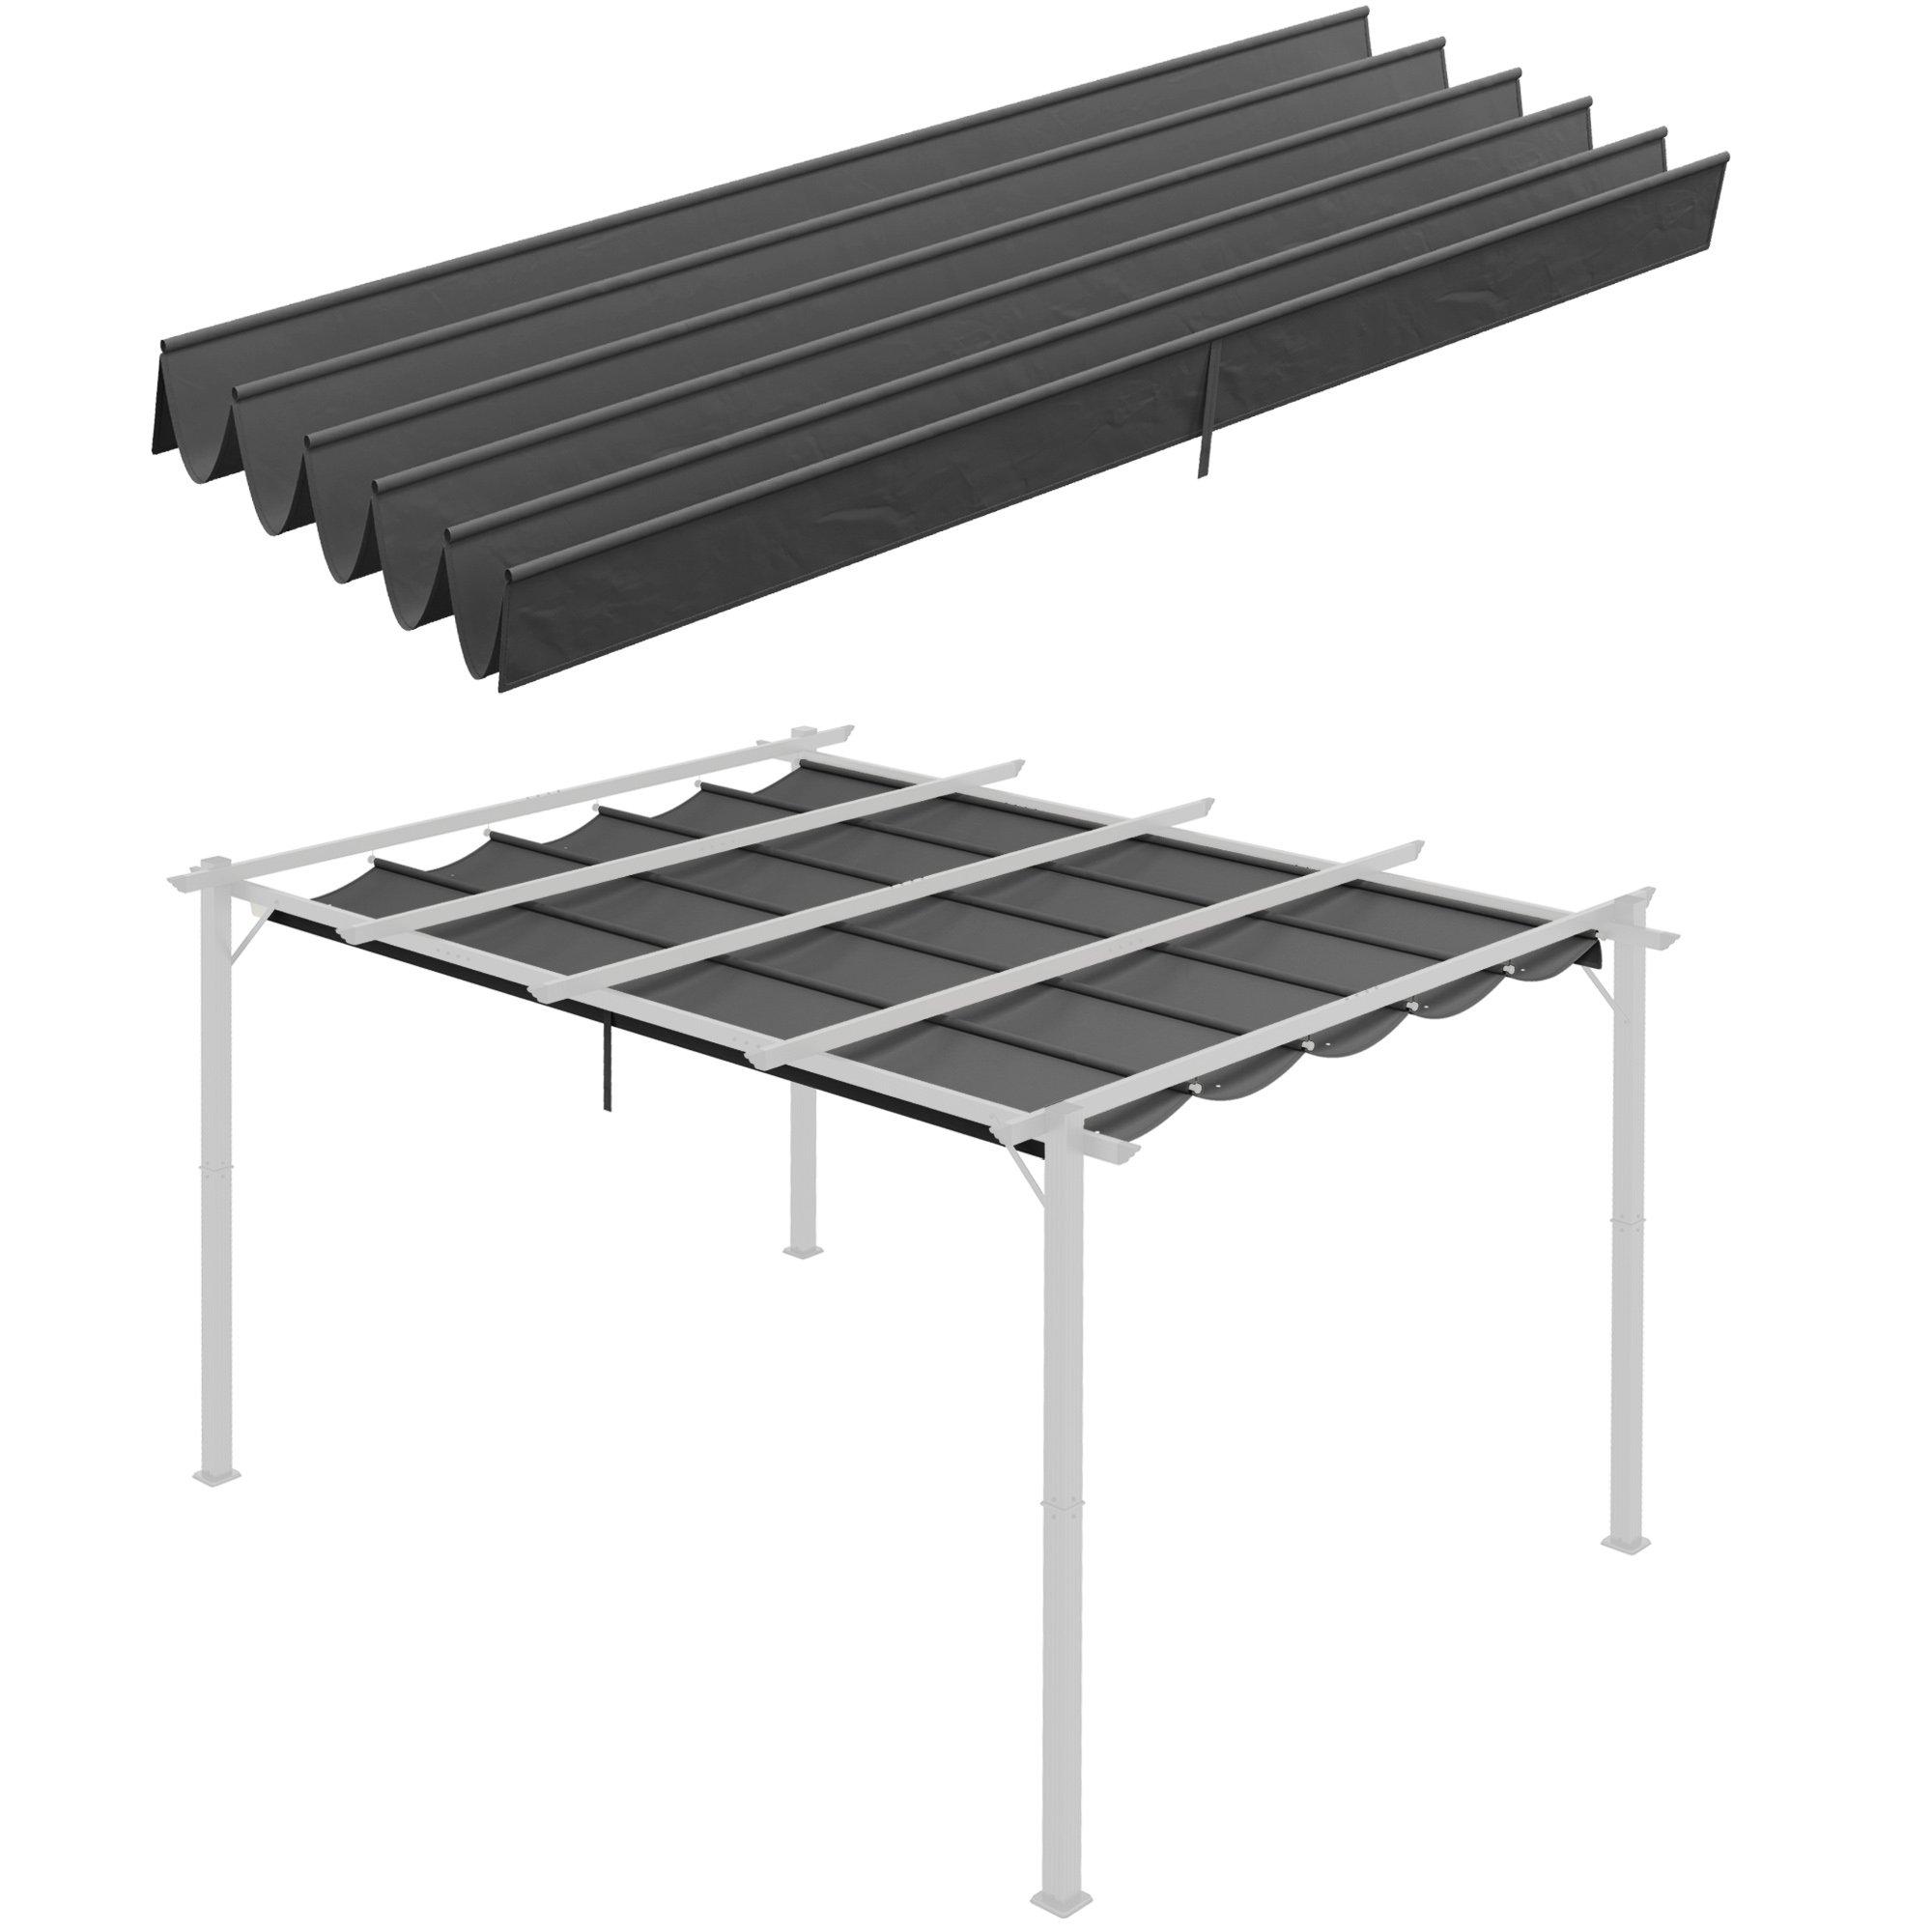 Pergola Shade Cover for 4 x 3(m) Pergola, Replacement Canopy Fabric Only